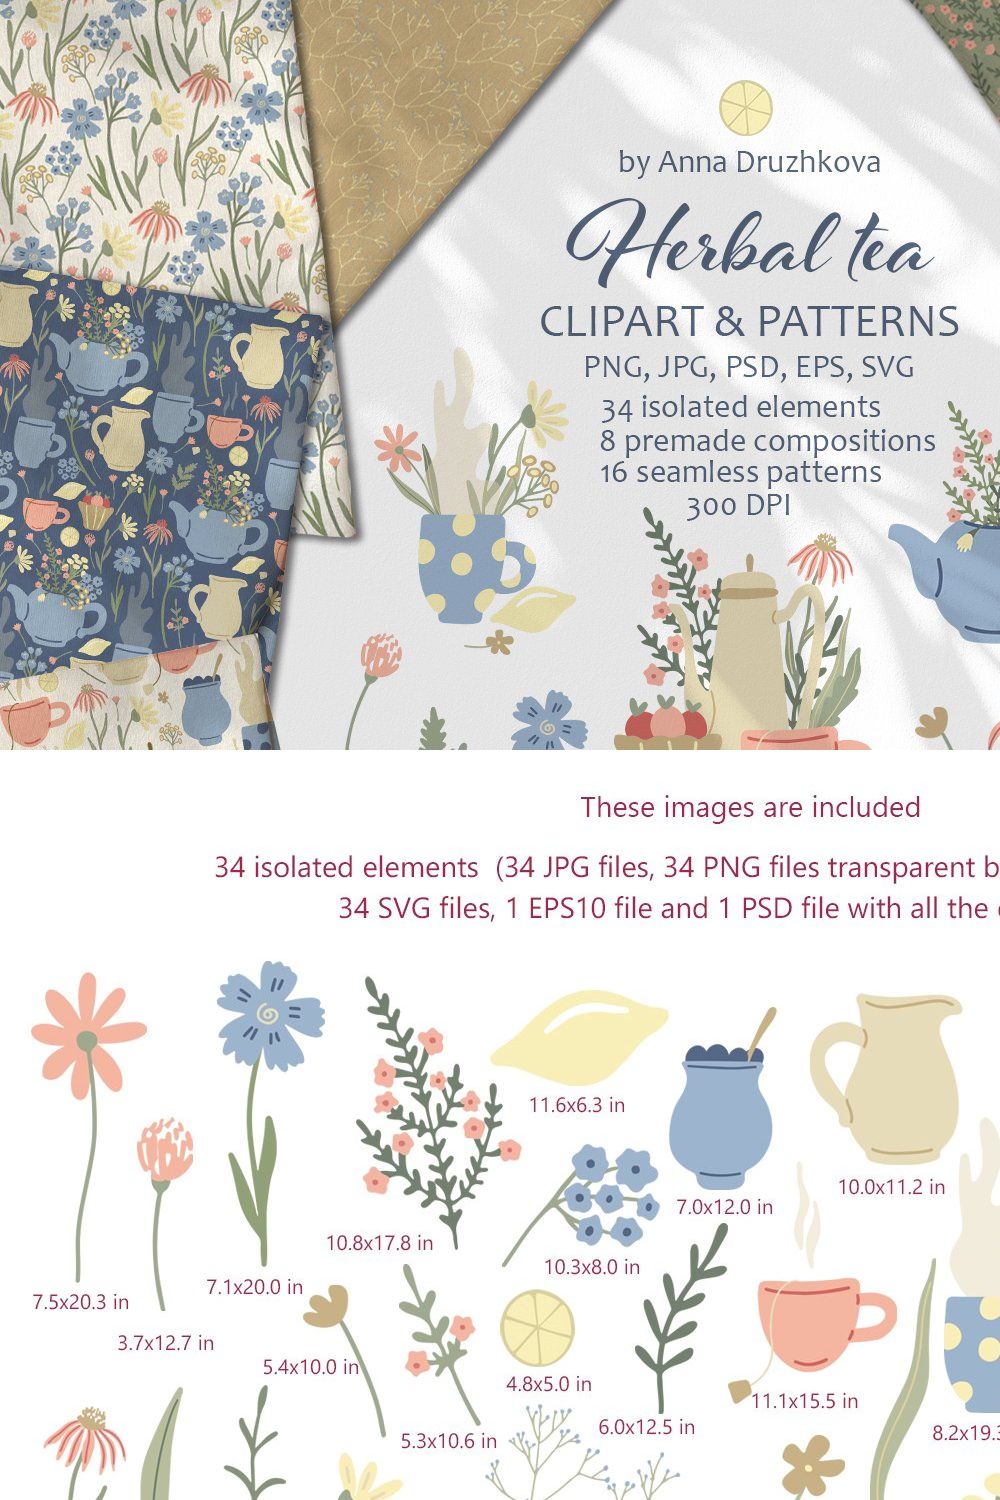 Herbal tea clipart and patterns pinterest preview image.